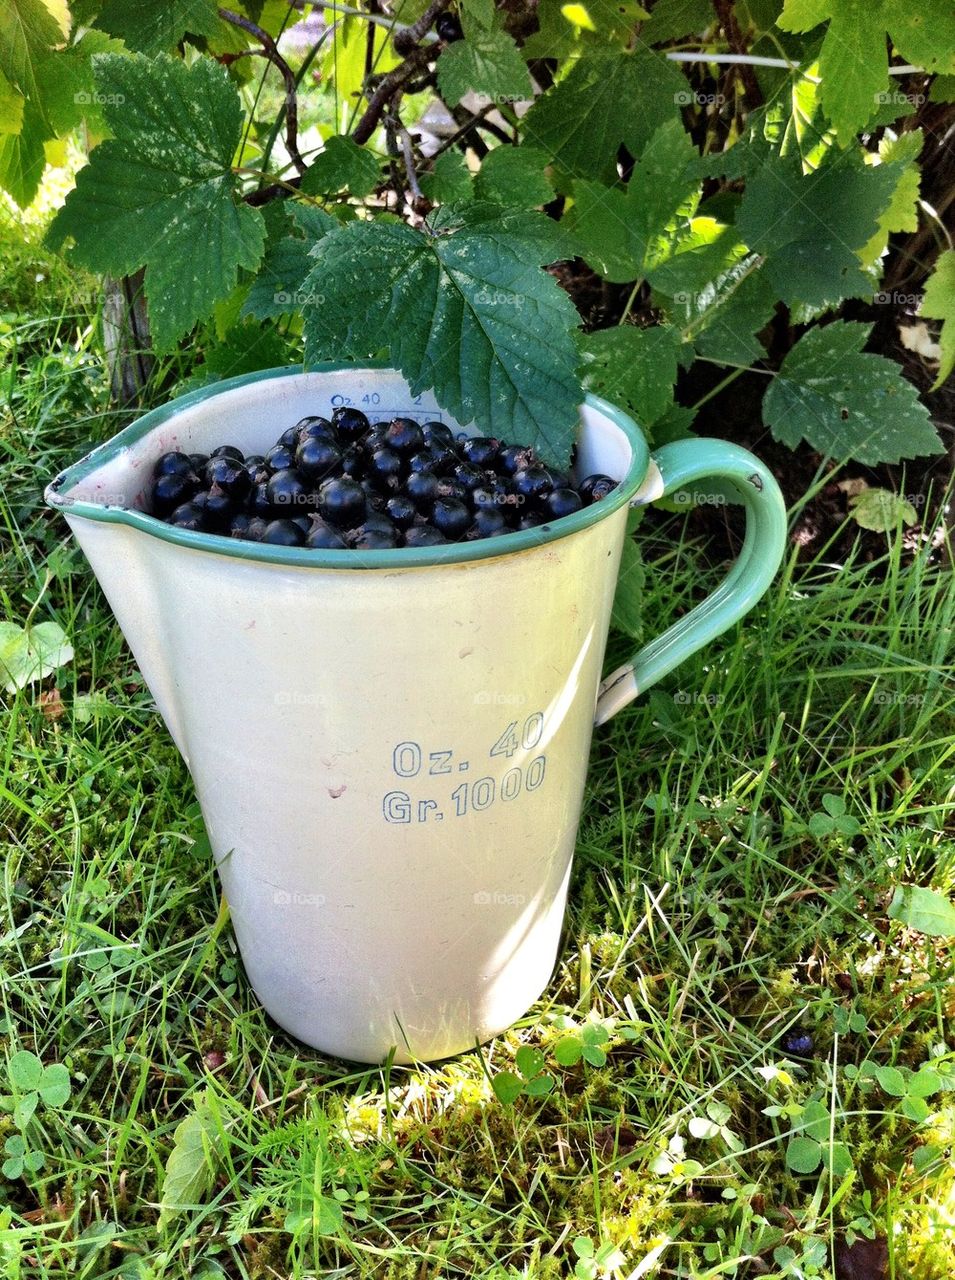 Picked black currant in vintage can.